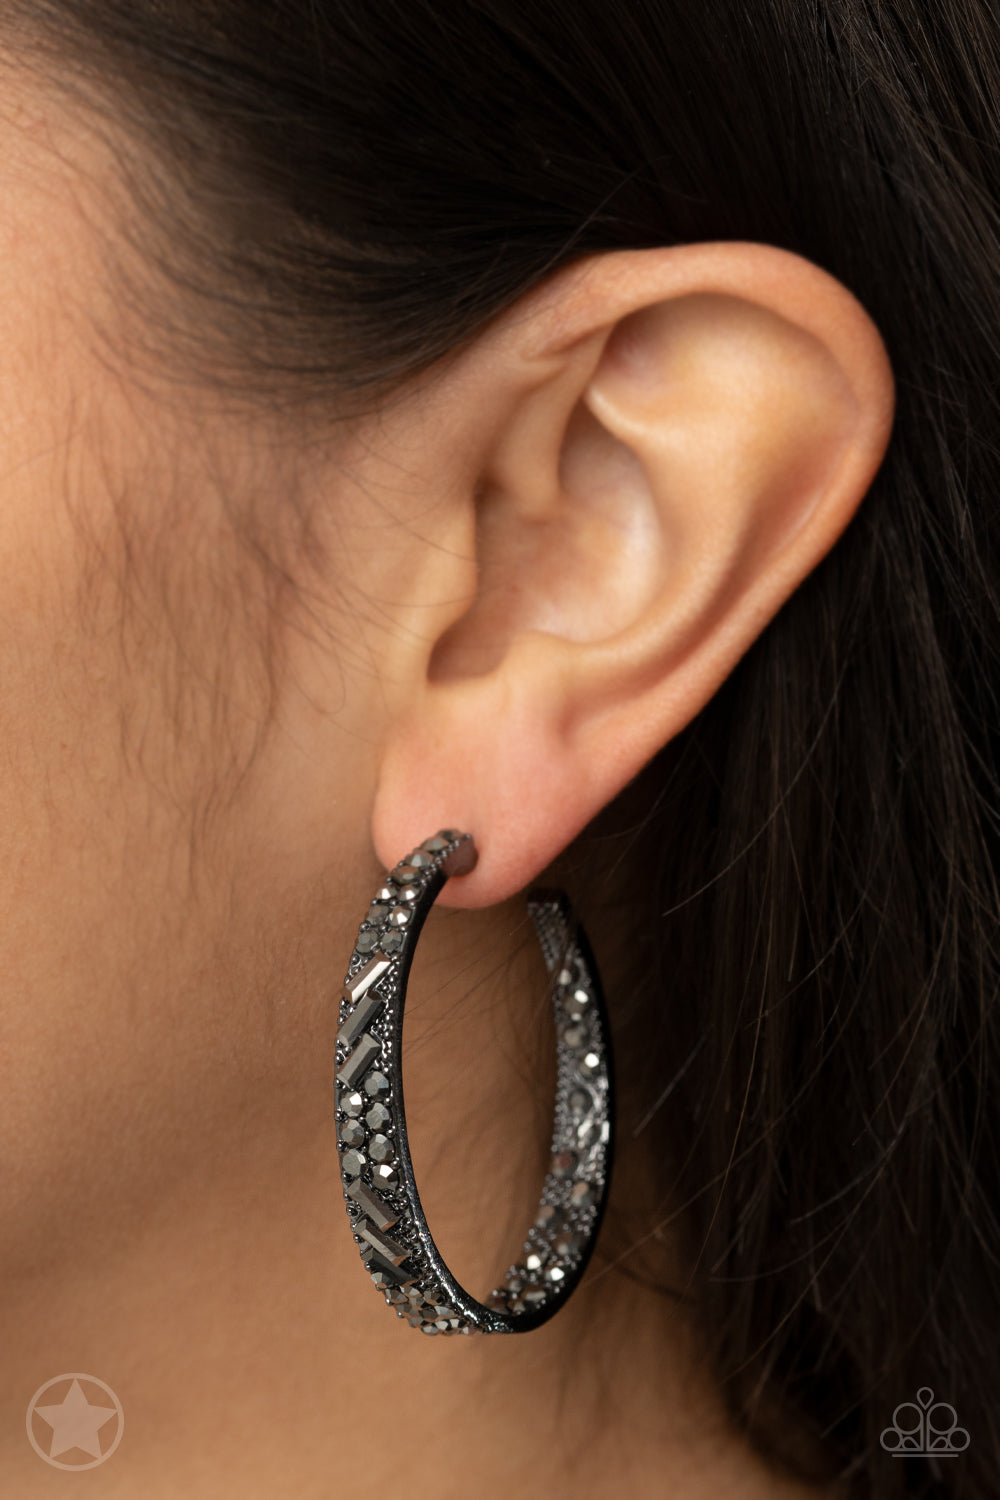 The front facing surface of a chunky gunmetal hoop is dipped in brilliantly sparkling hematite rhinestones while light-catching texture wraps around the back. The interior of the hoop features the opposite pattern, creating the illusion of a full hoop of blinding shimmer. Earring attaches to a standard post fitting. Hoop measures 1 3/4